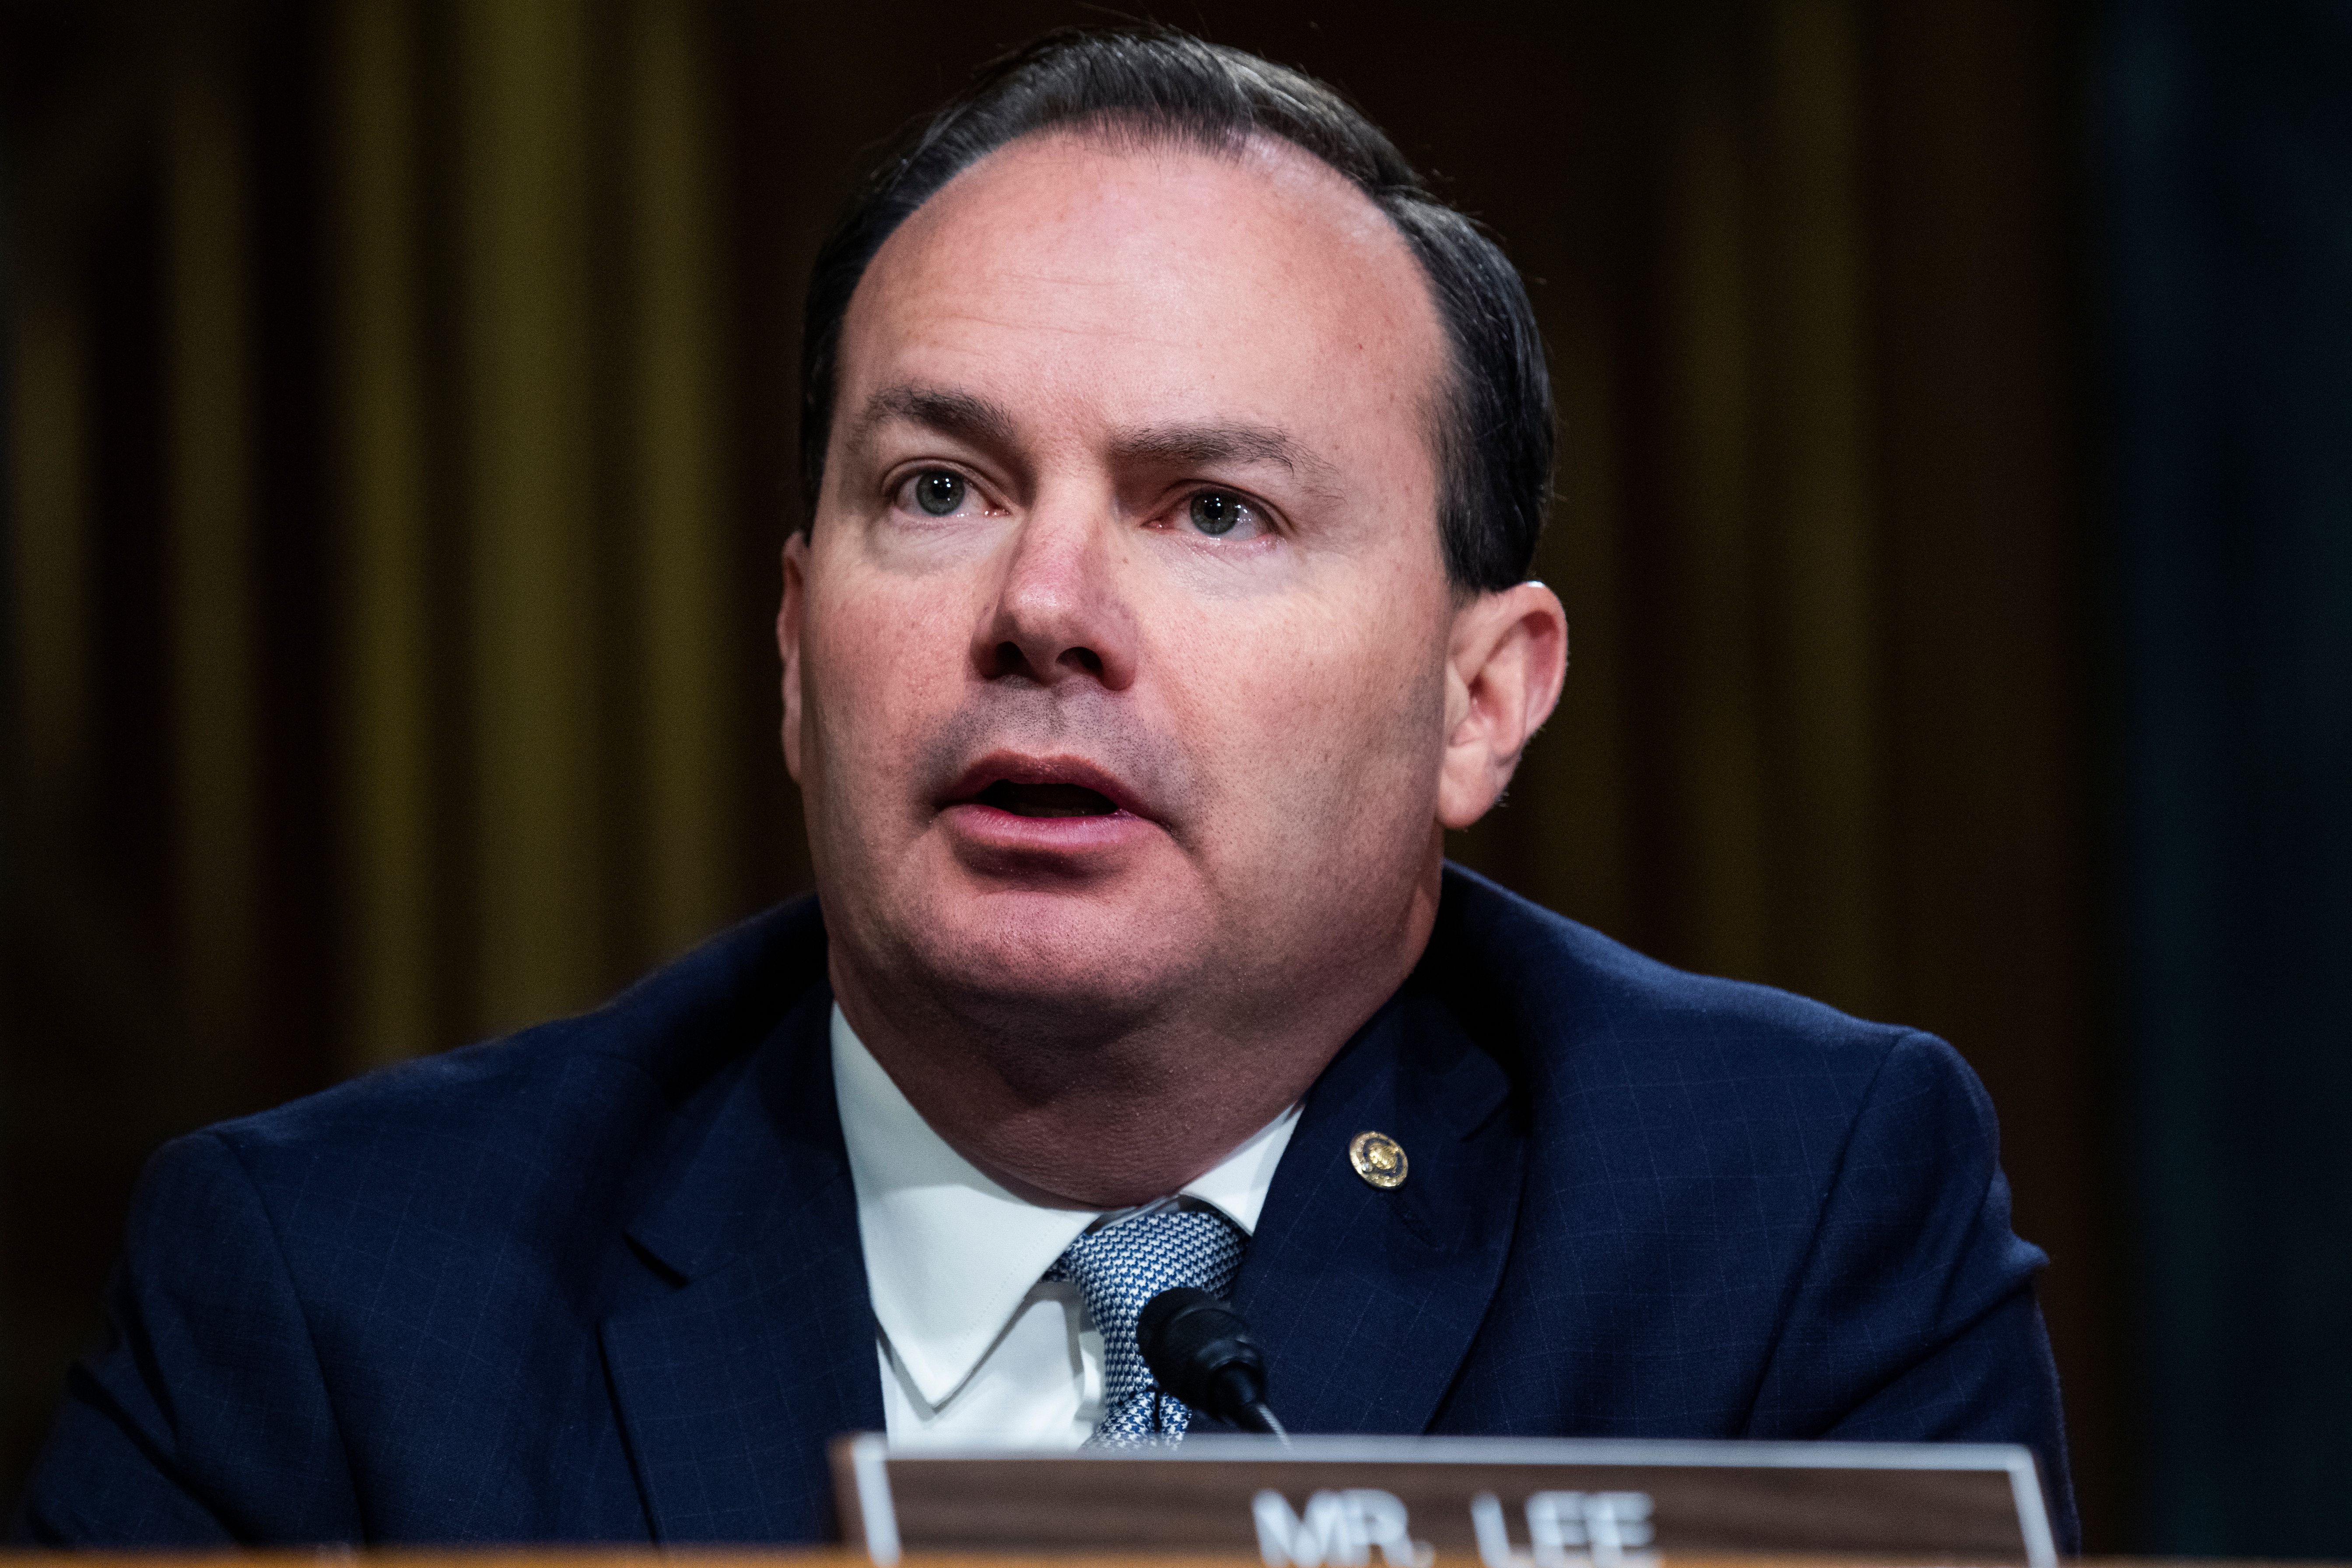 Sen. Mike Lee, R-UT, speaks during the Senate Judiciary Committee hearing titled "Examining Best Practices for Incarceration and Detention During COVID-19," in the Dirksen Building in Washington, DC on June 2, 2020. (Photo by Tom Williams / POOL / AFP) (Photo by TOM WILLIAMS/POOL/AFP via Getty Images)